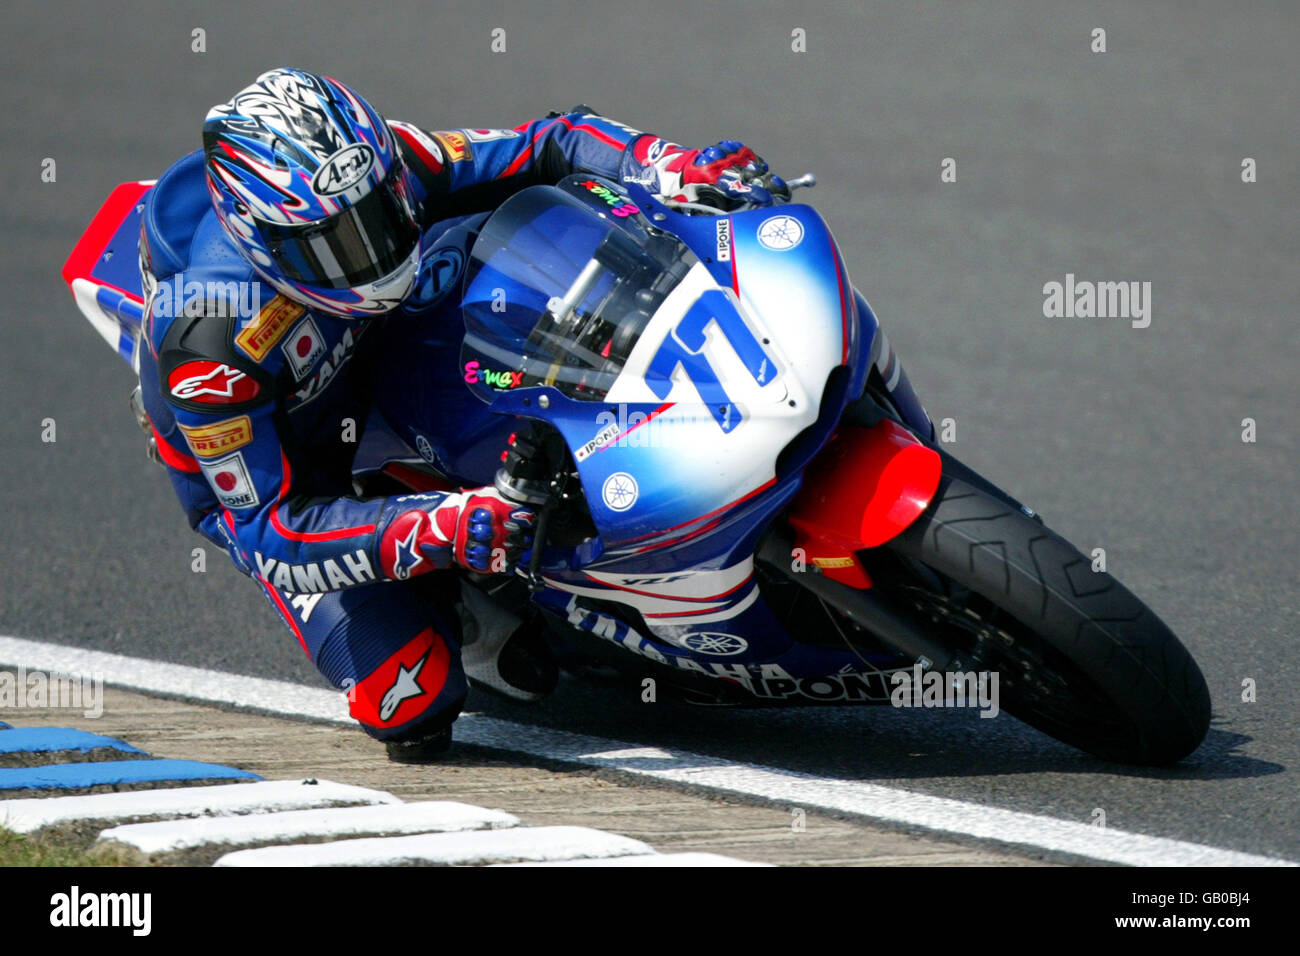 Motorcycling - Supersport World Championship - Silverstone. Thierry Vd Bosch, Yamaha France - Ipone Stock Photo